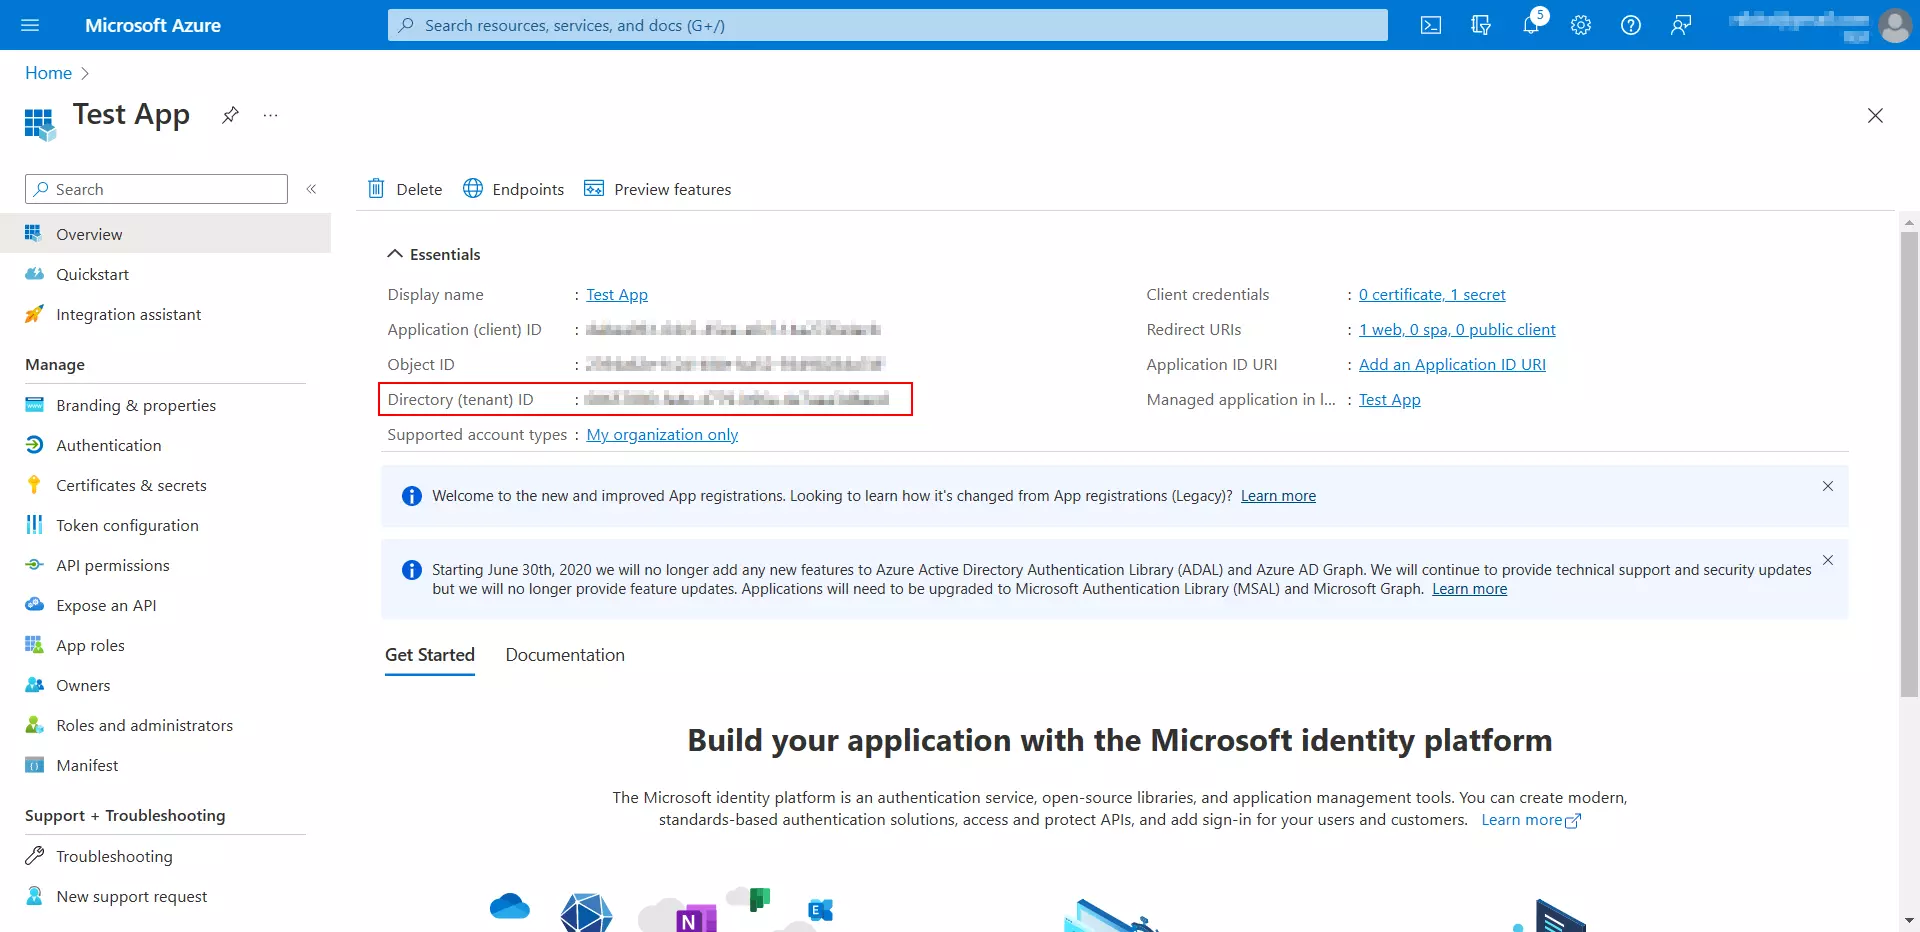 Azure AD Dashboard - copy the Directory (tenant) ID